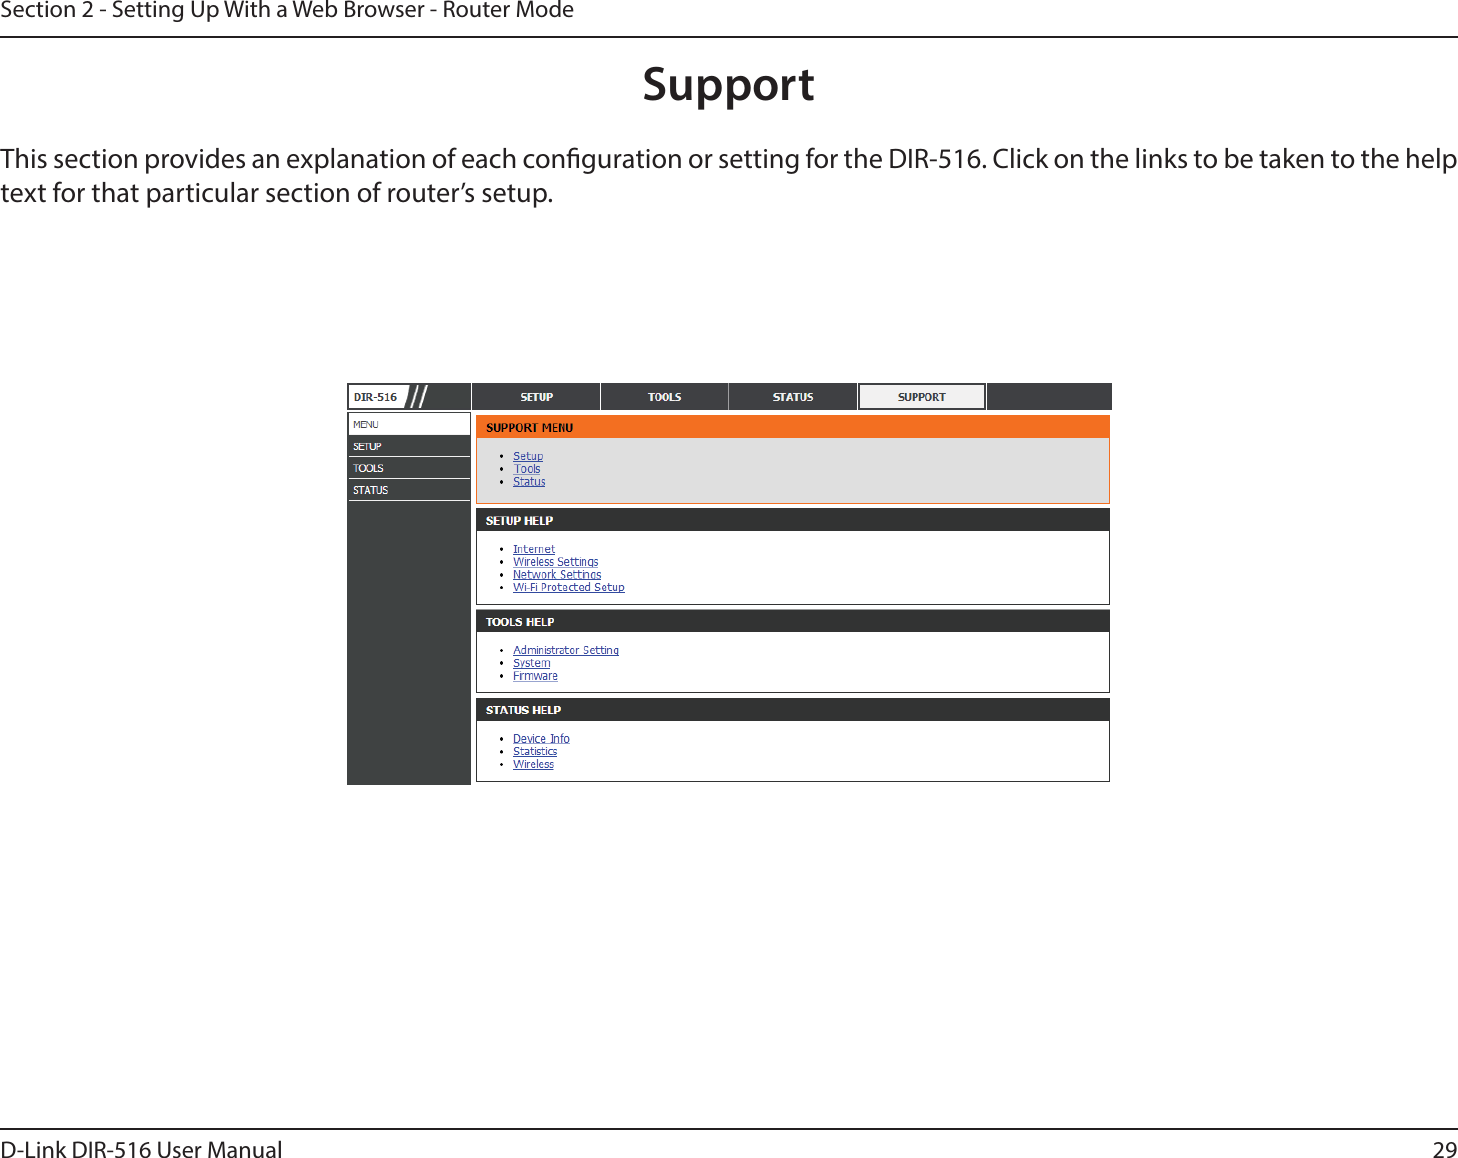 29D-Link DIR-516 User ManualSection 2 - Setting Up With a Web Browser - Router ModeSupportThis section provides an explanation of each conguration or setting for the DIR-516. Click on the links to be taken to the help text for that particular section of router’s setup. 